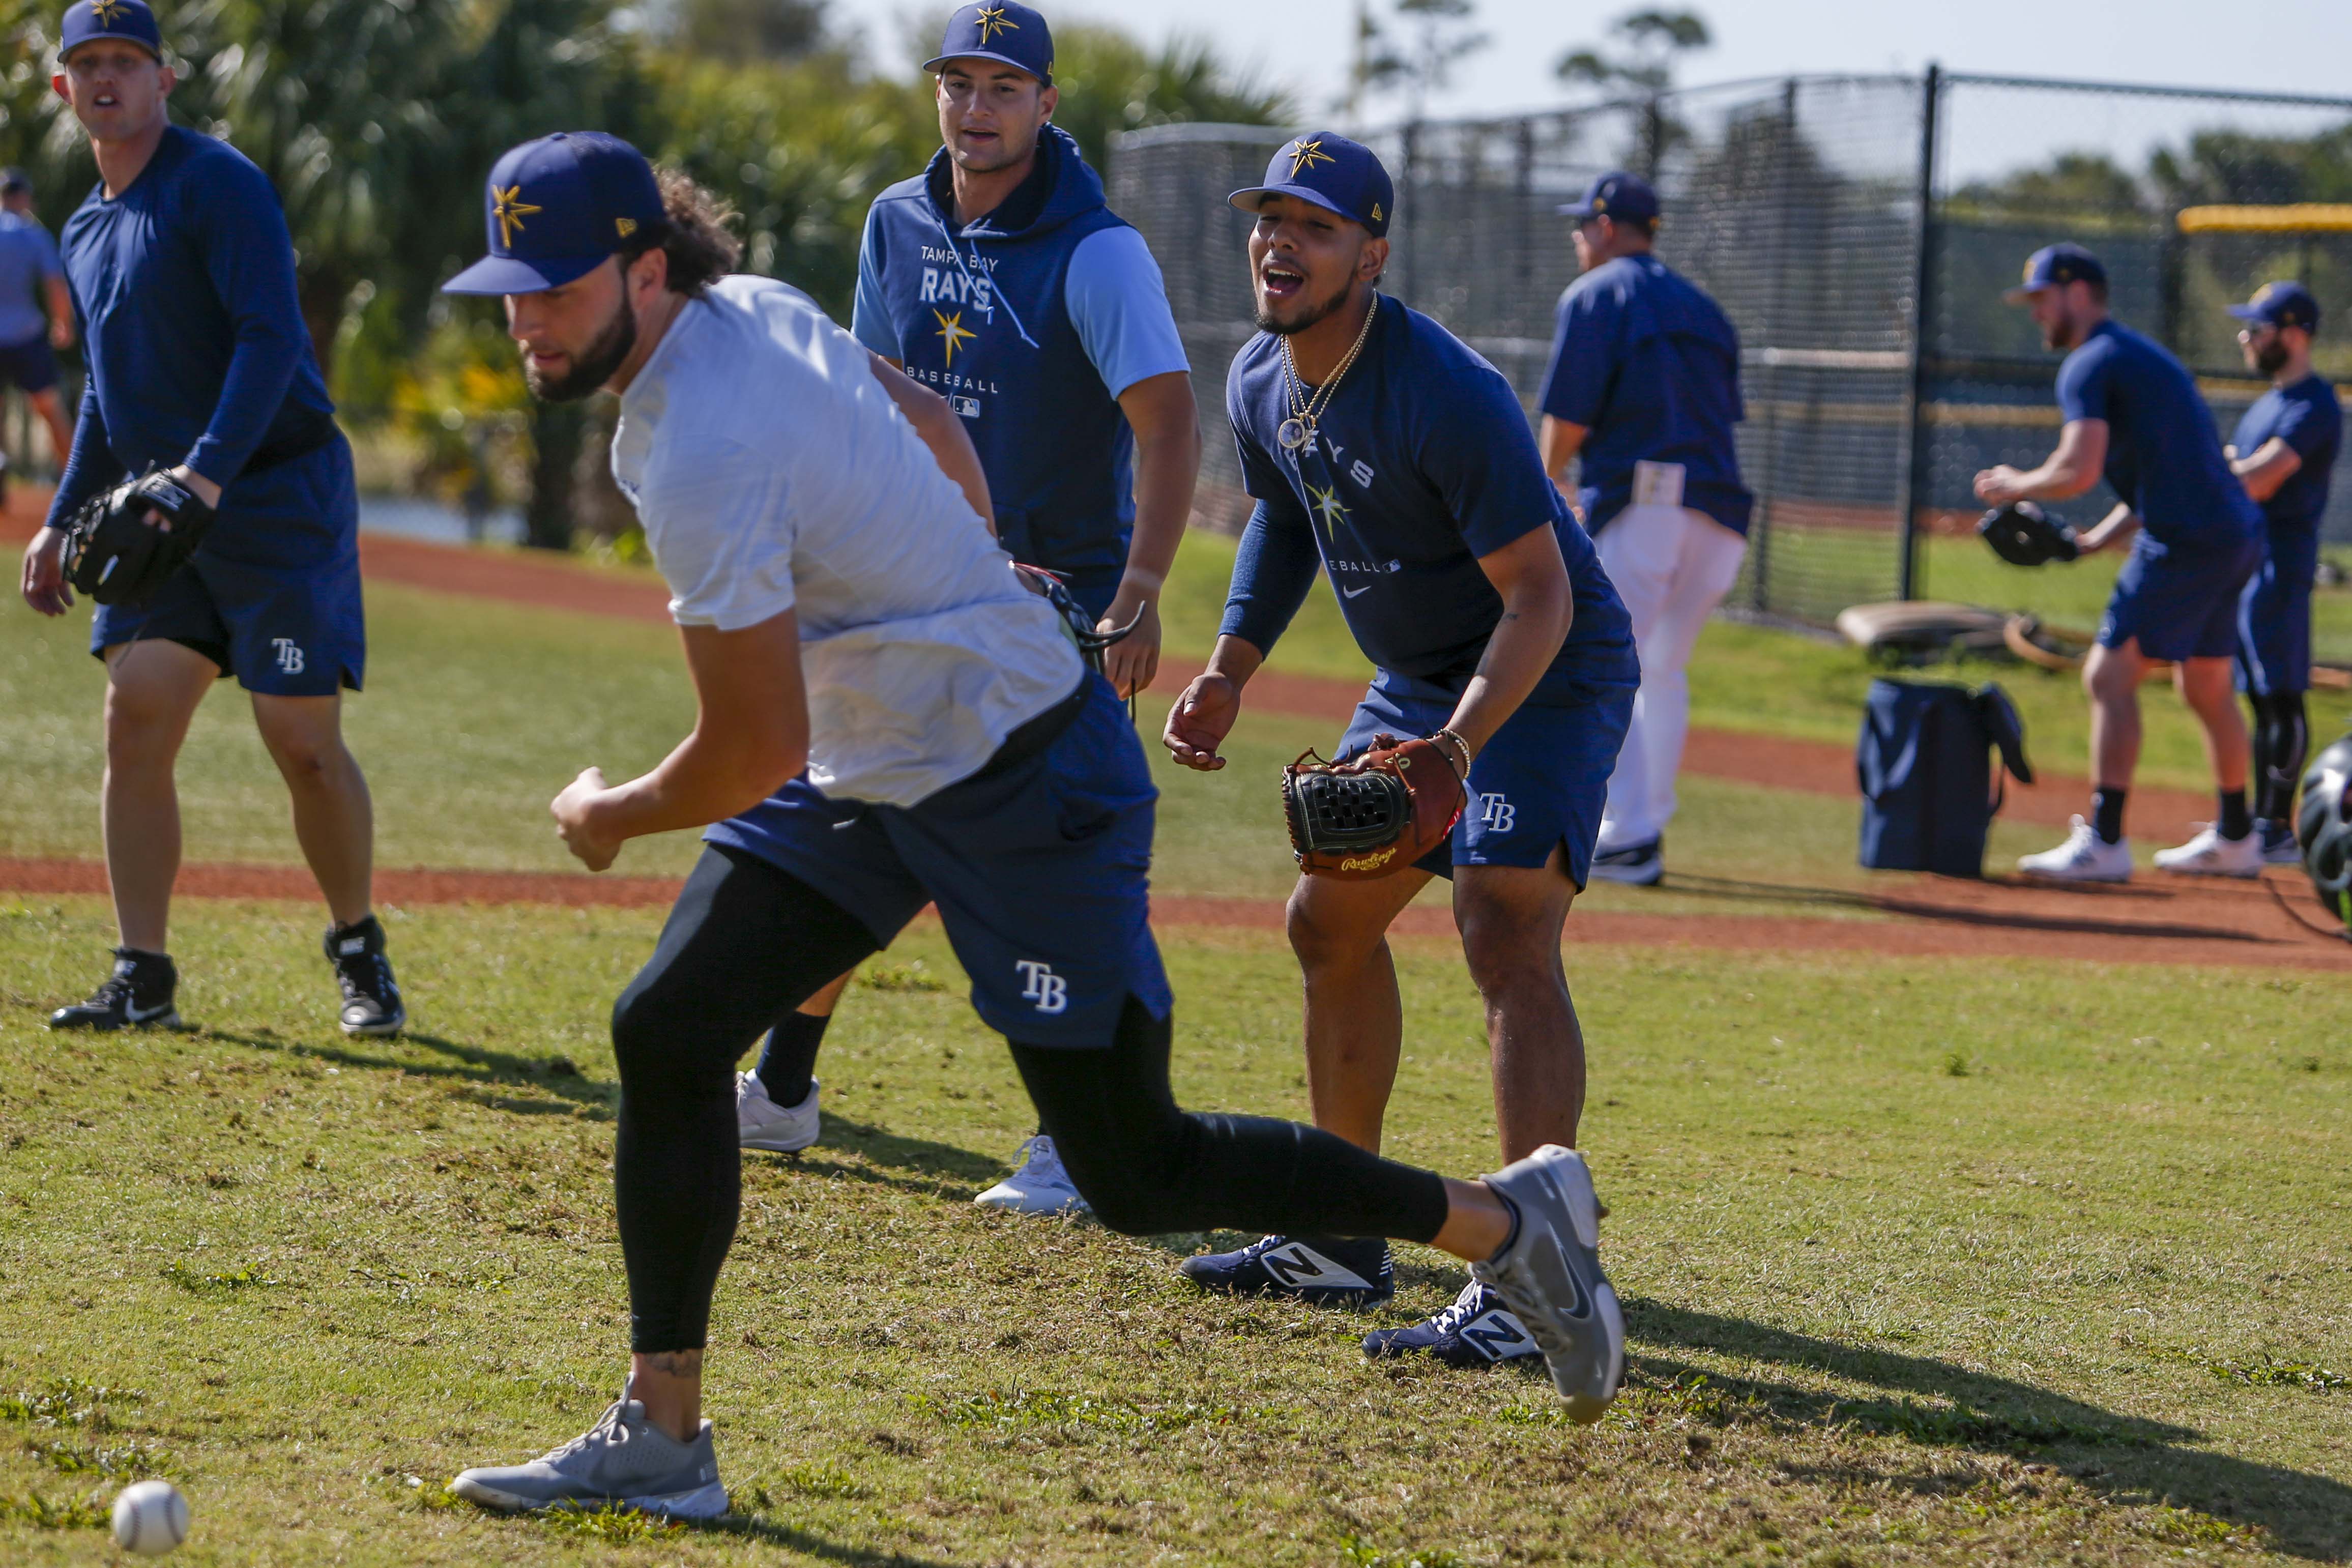 Pasco, Rays spring training plan gets brushback pitch